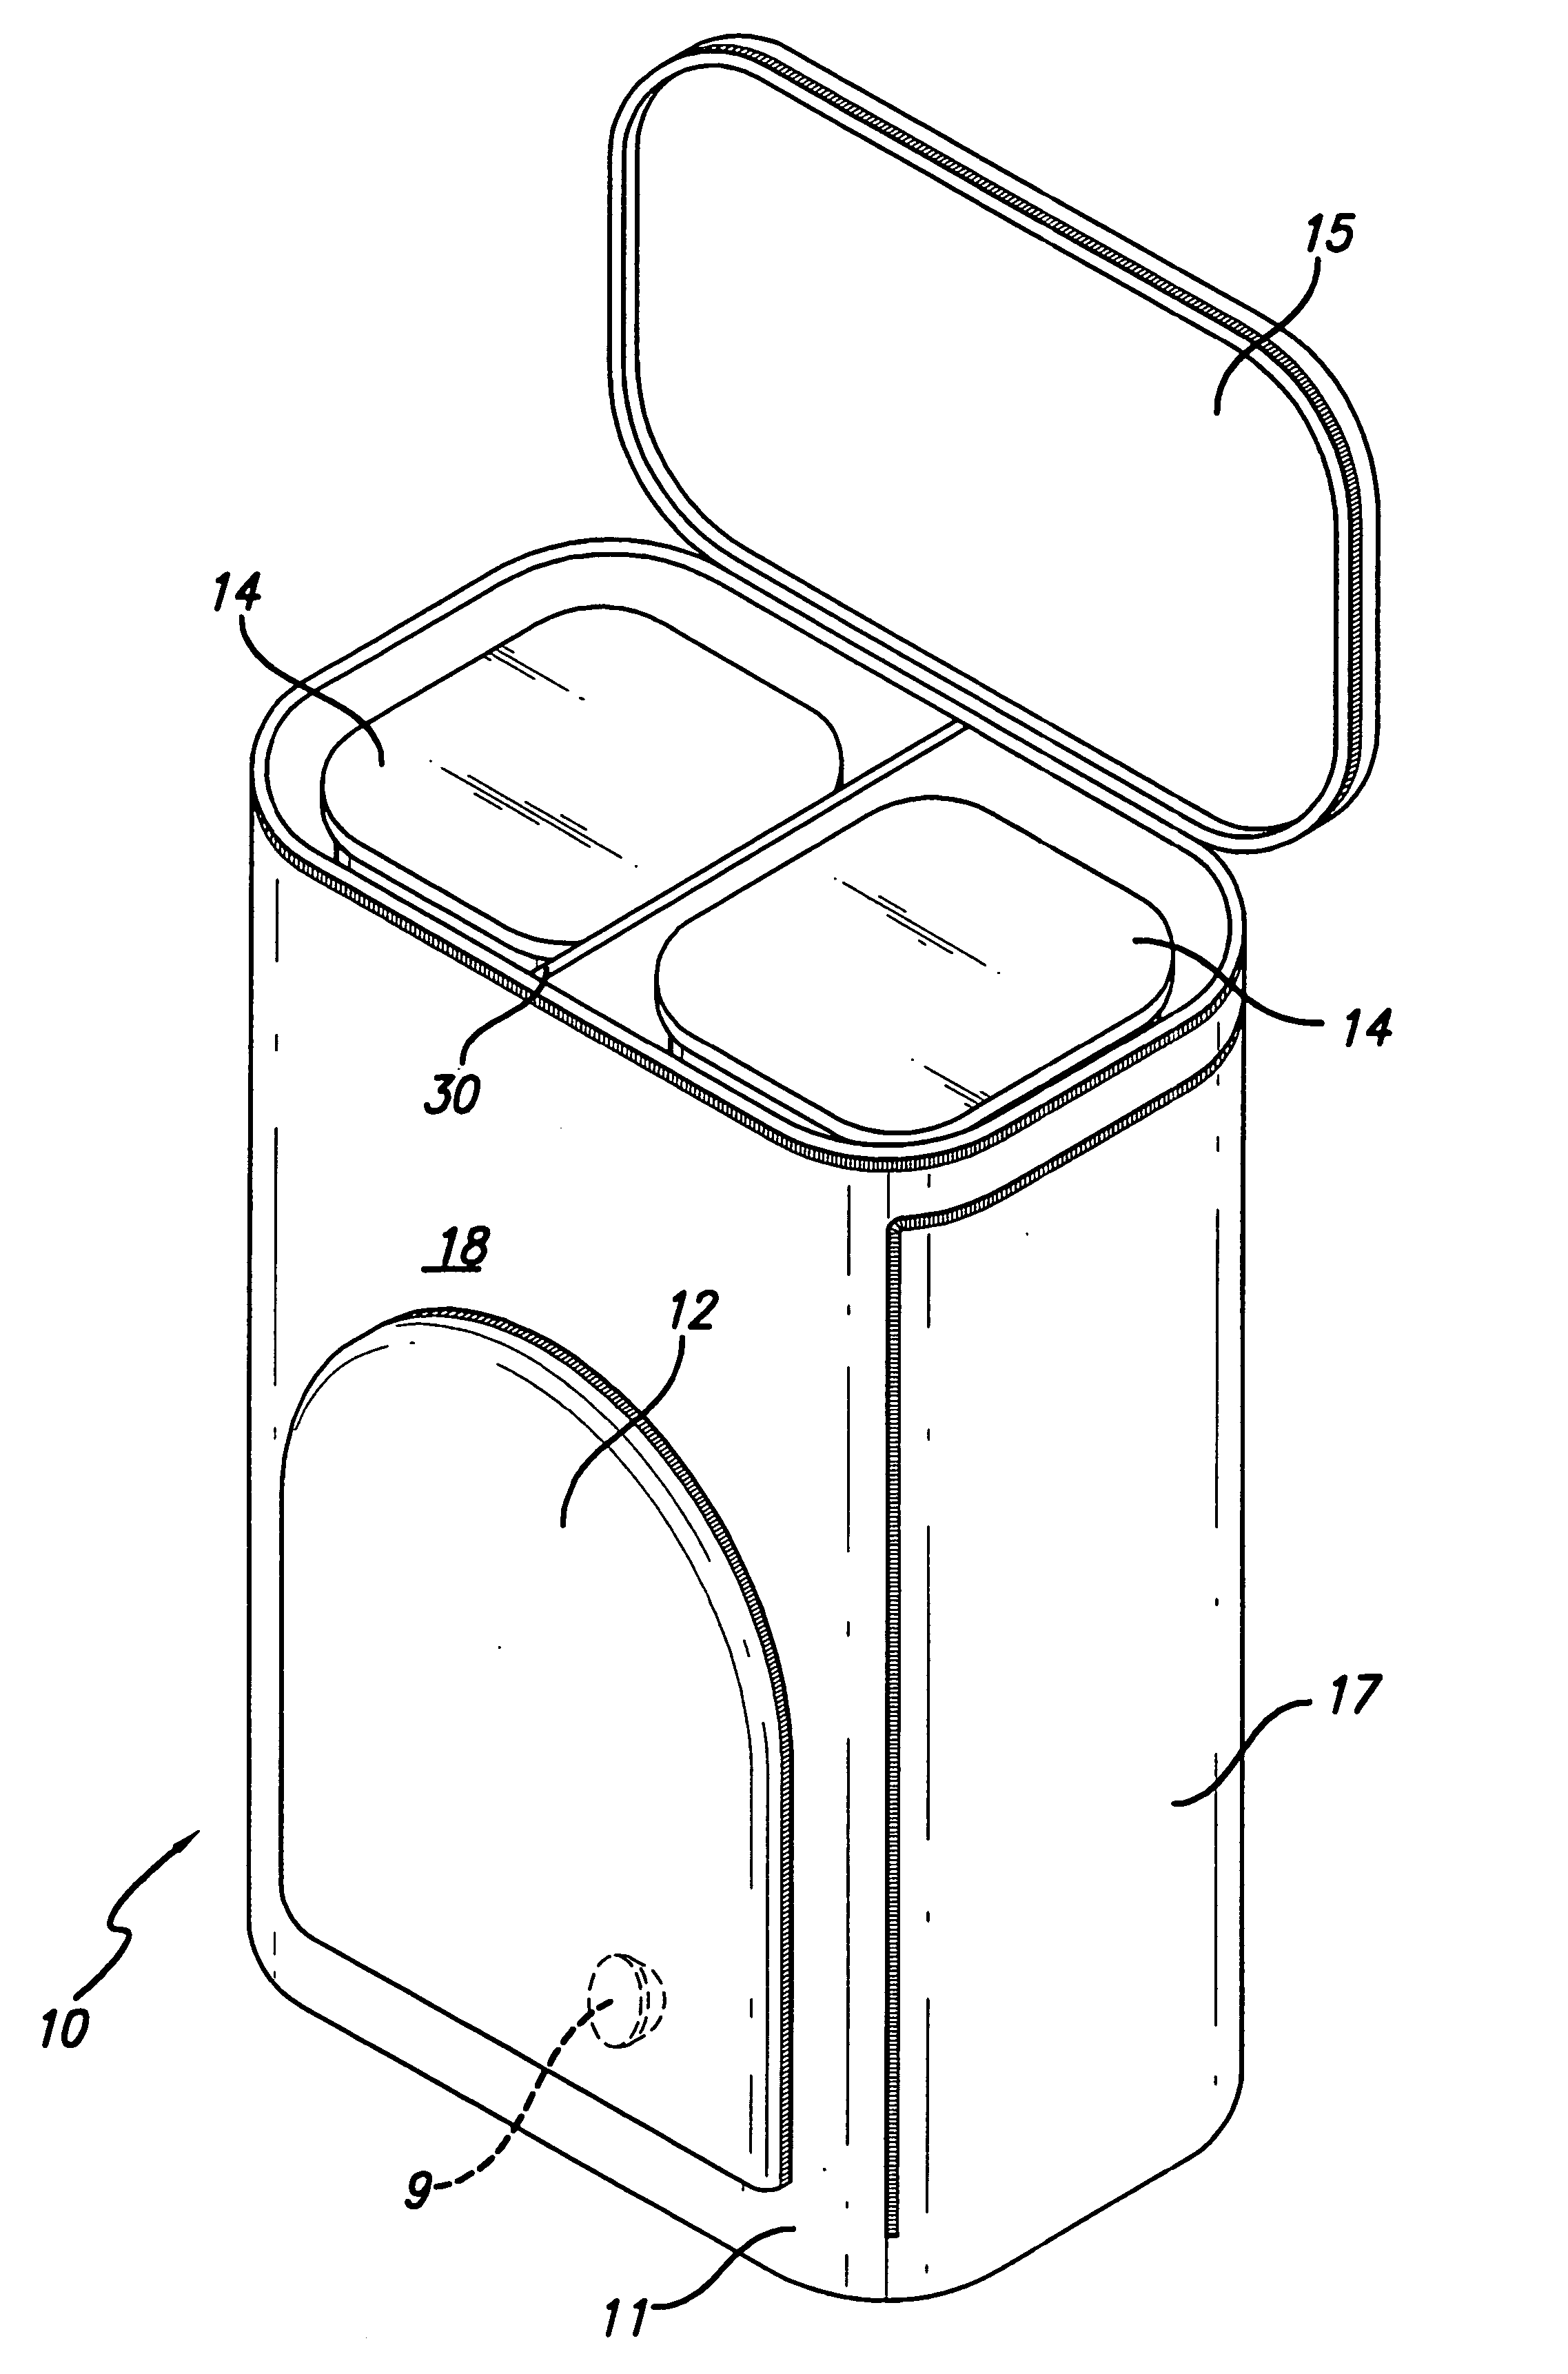 Modular apparatus with timer and method for nutrition system utilizing portions determined by the eater's weight